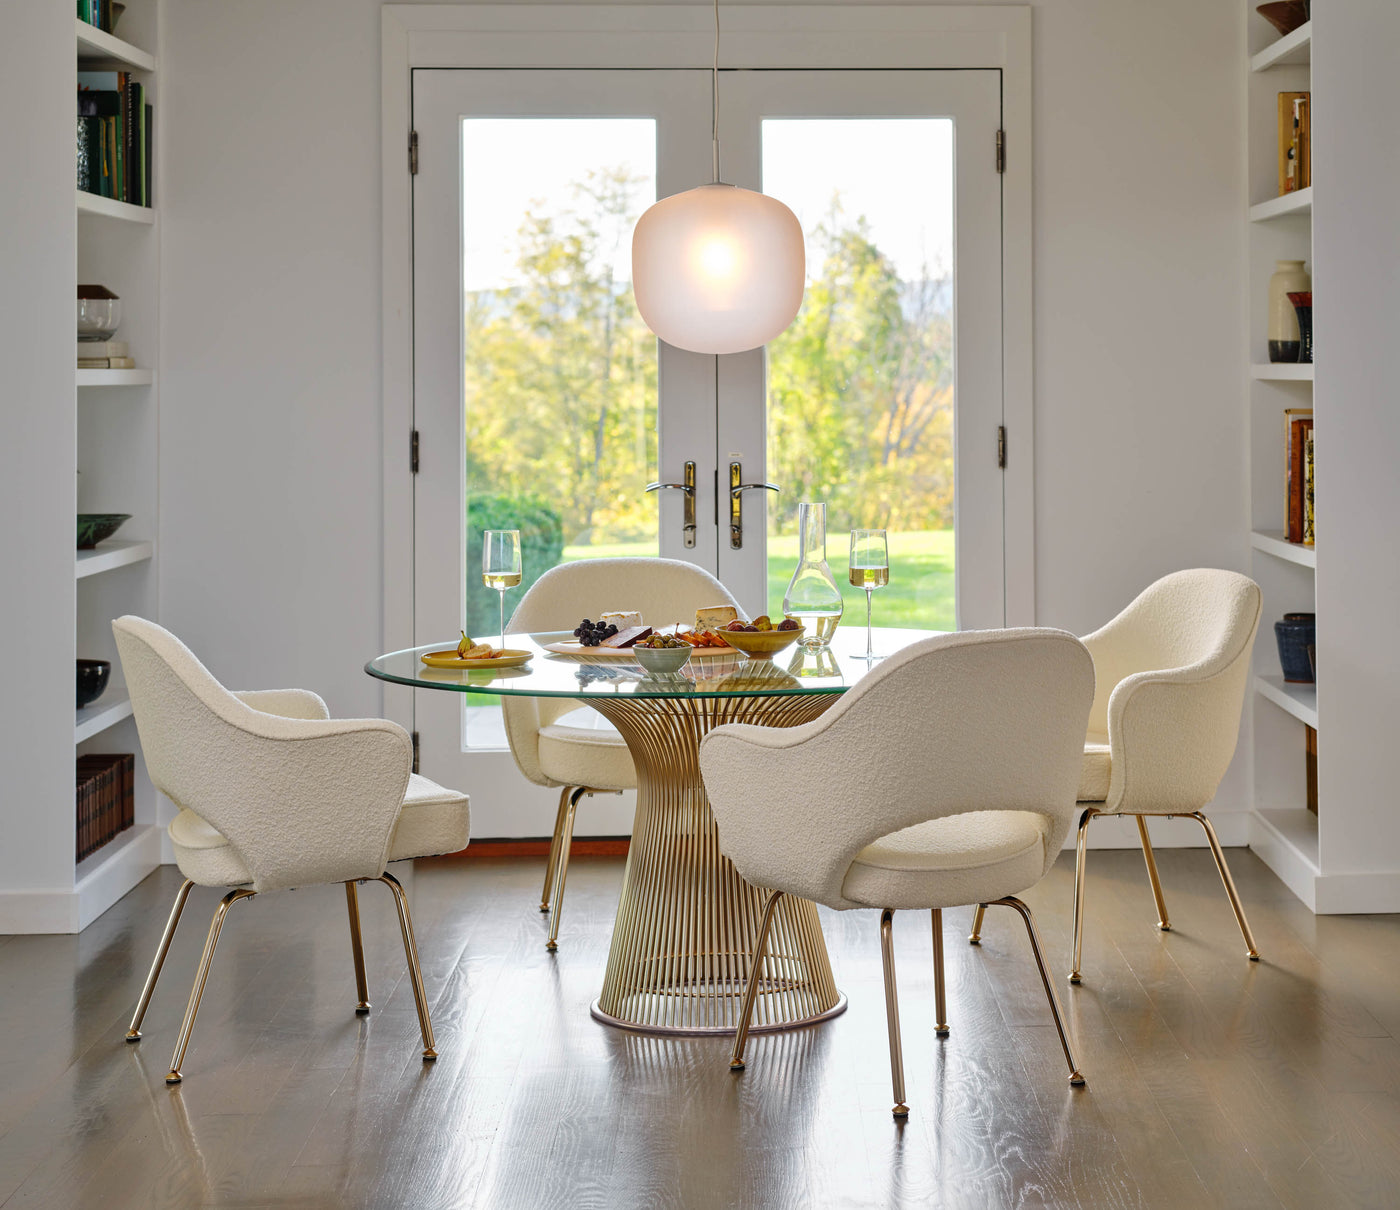 Knoll Platner Dining Table Gold with Saarinen Executive Armchairs and Rime Pendant Light